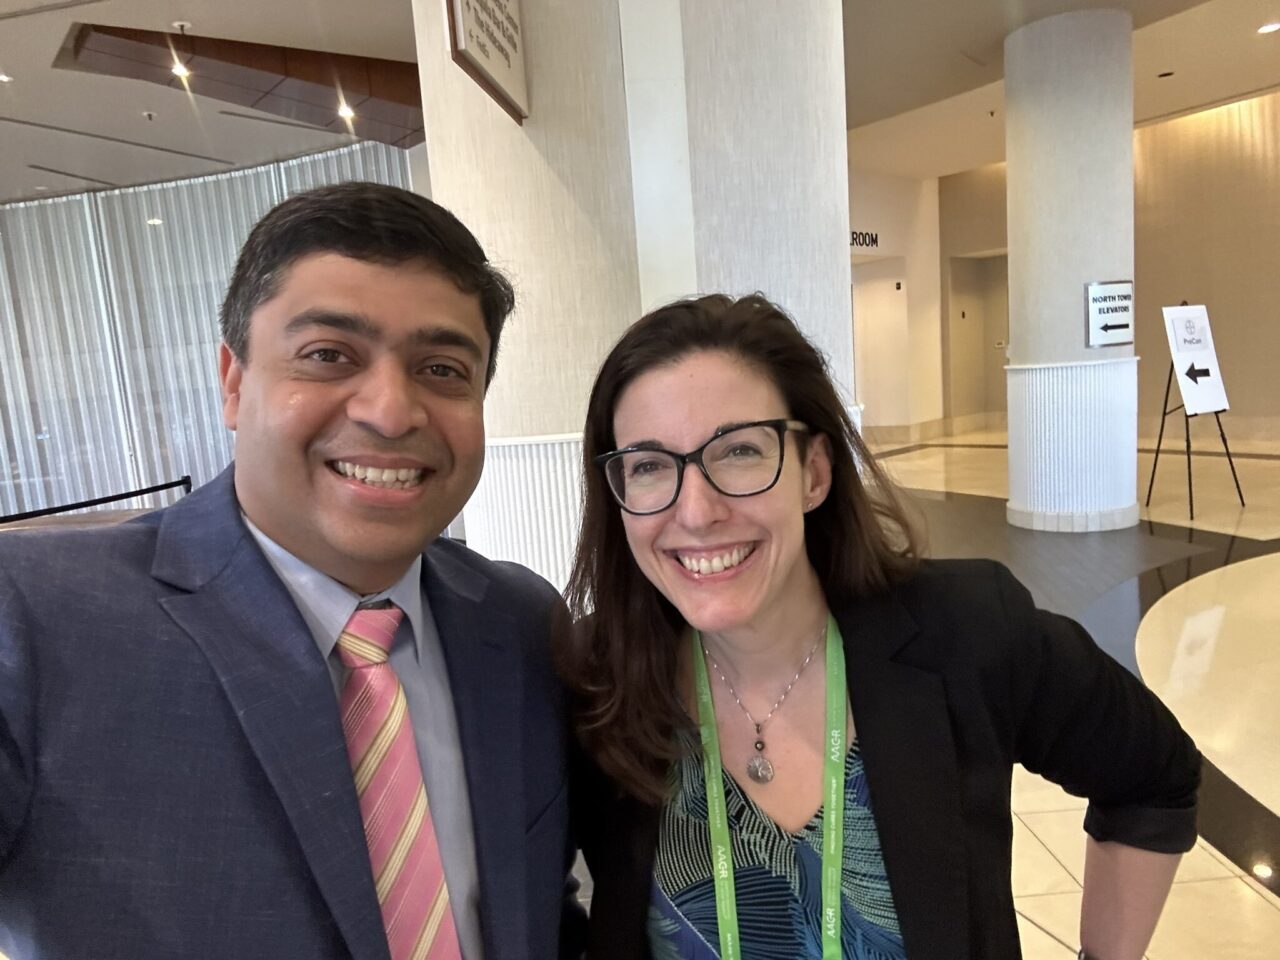 Vivek Subbiah: Super delighted to meet the amazing Elizabeth McKenna, Executive Editor of Cancer Discovery